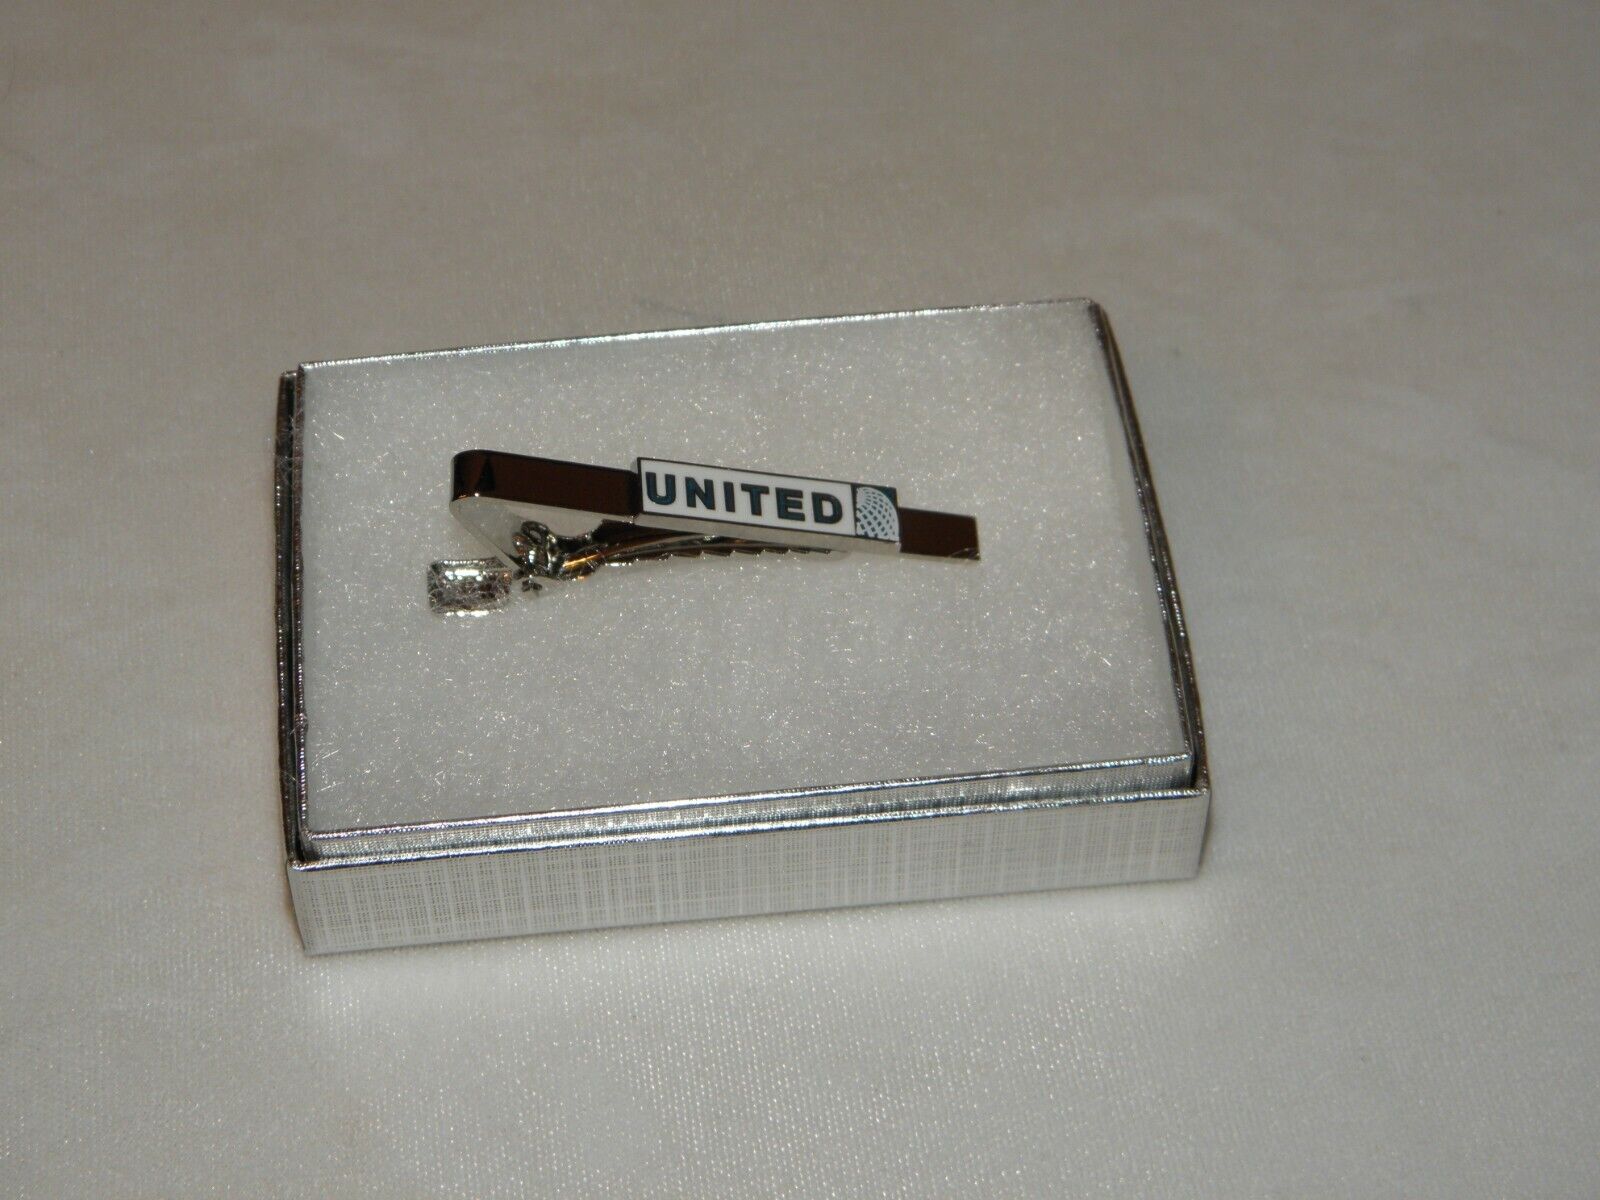 UNITED AIRLINES TIE BAR CLIP SILVER TONE TIE CLASP CONTINENTAL PILOT GIFT NEW